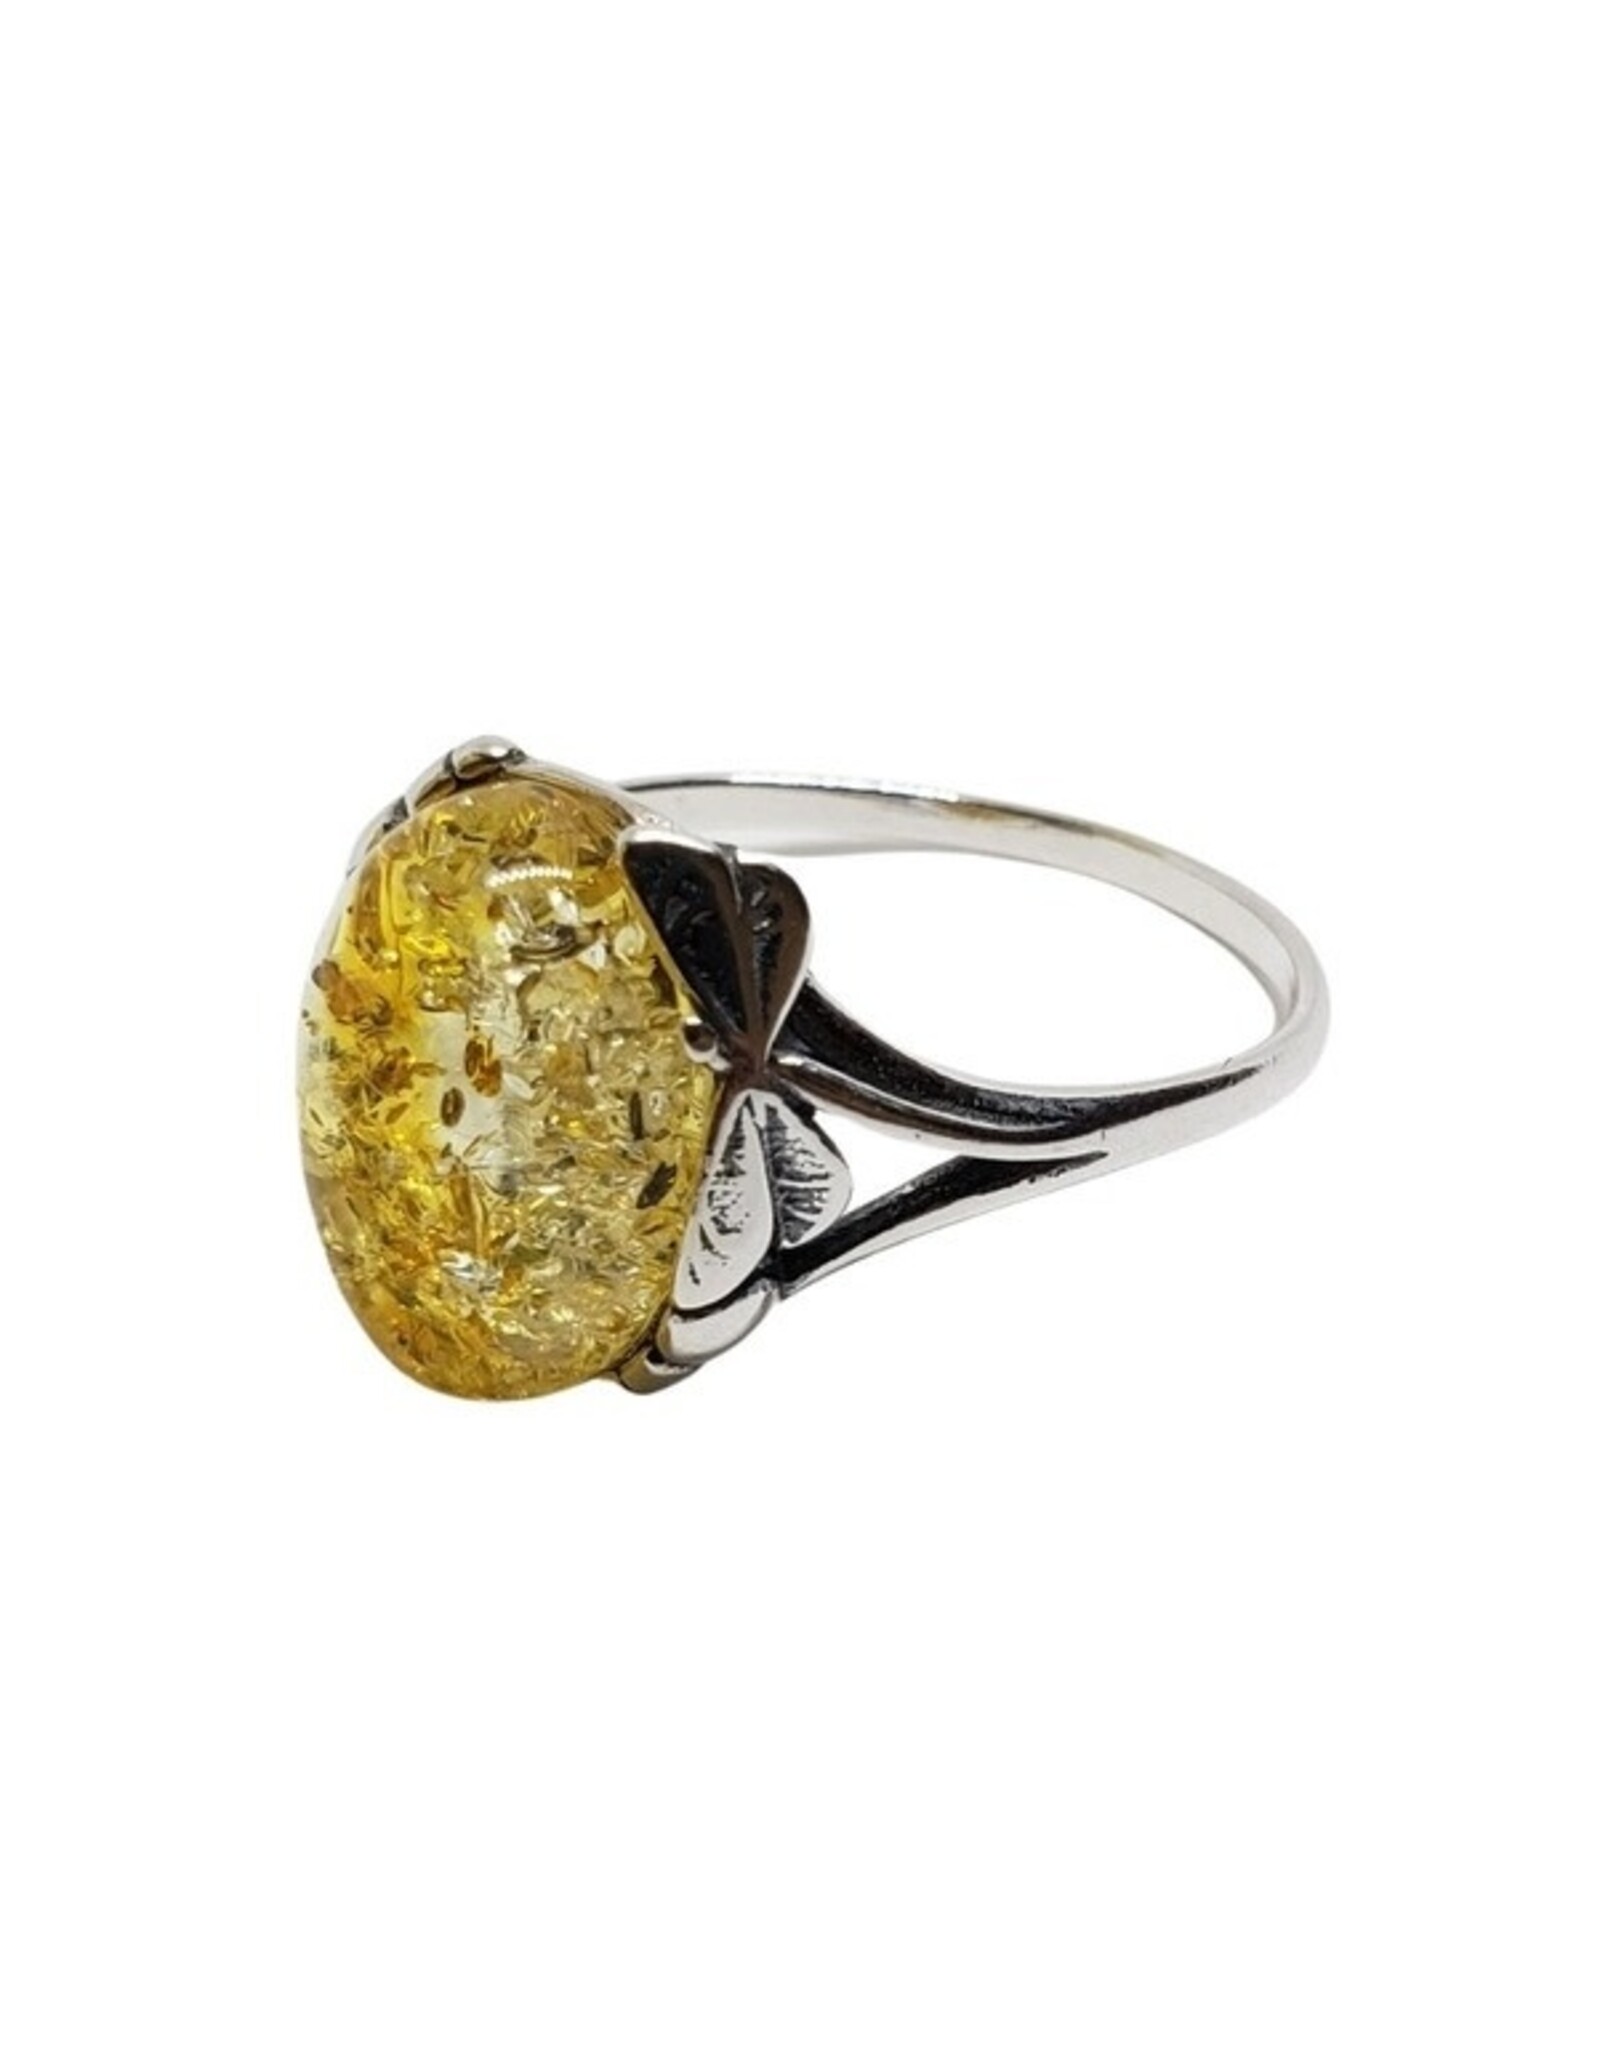 Citrine Baltic Amber Ring in Sterling Silver Dragonfly Setting  (Size 8)